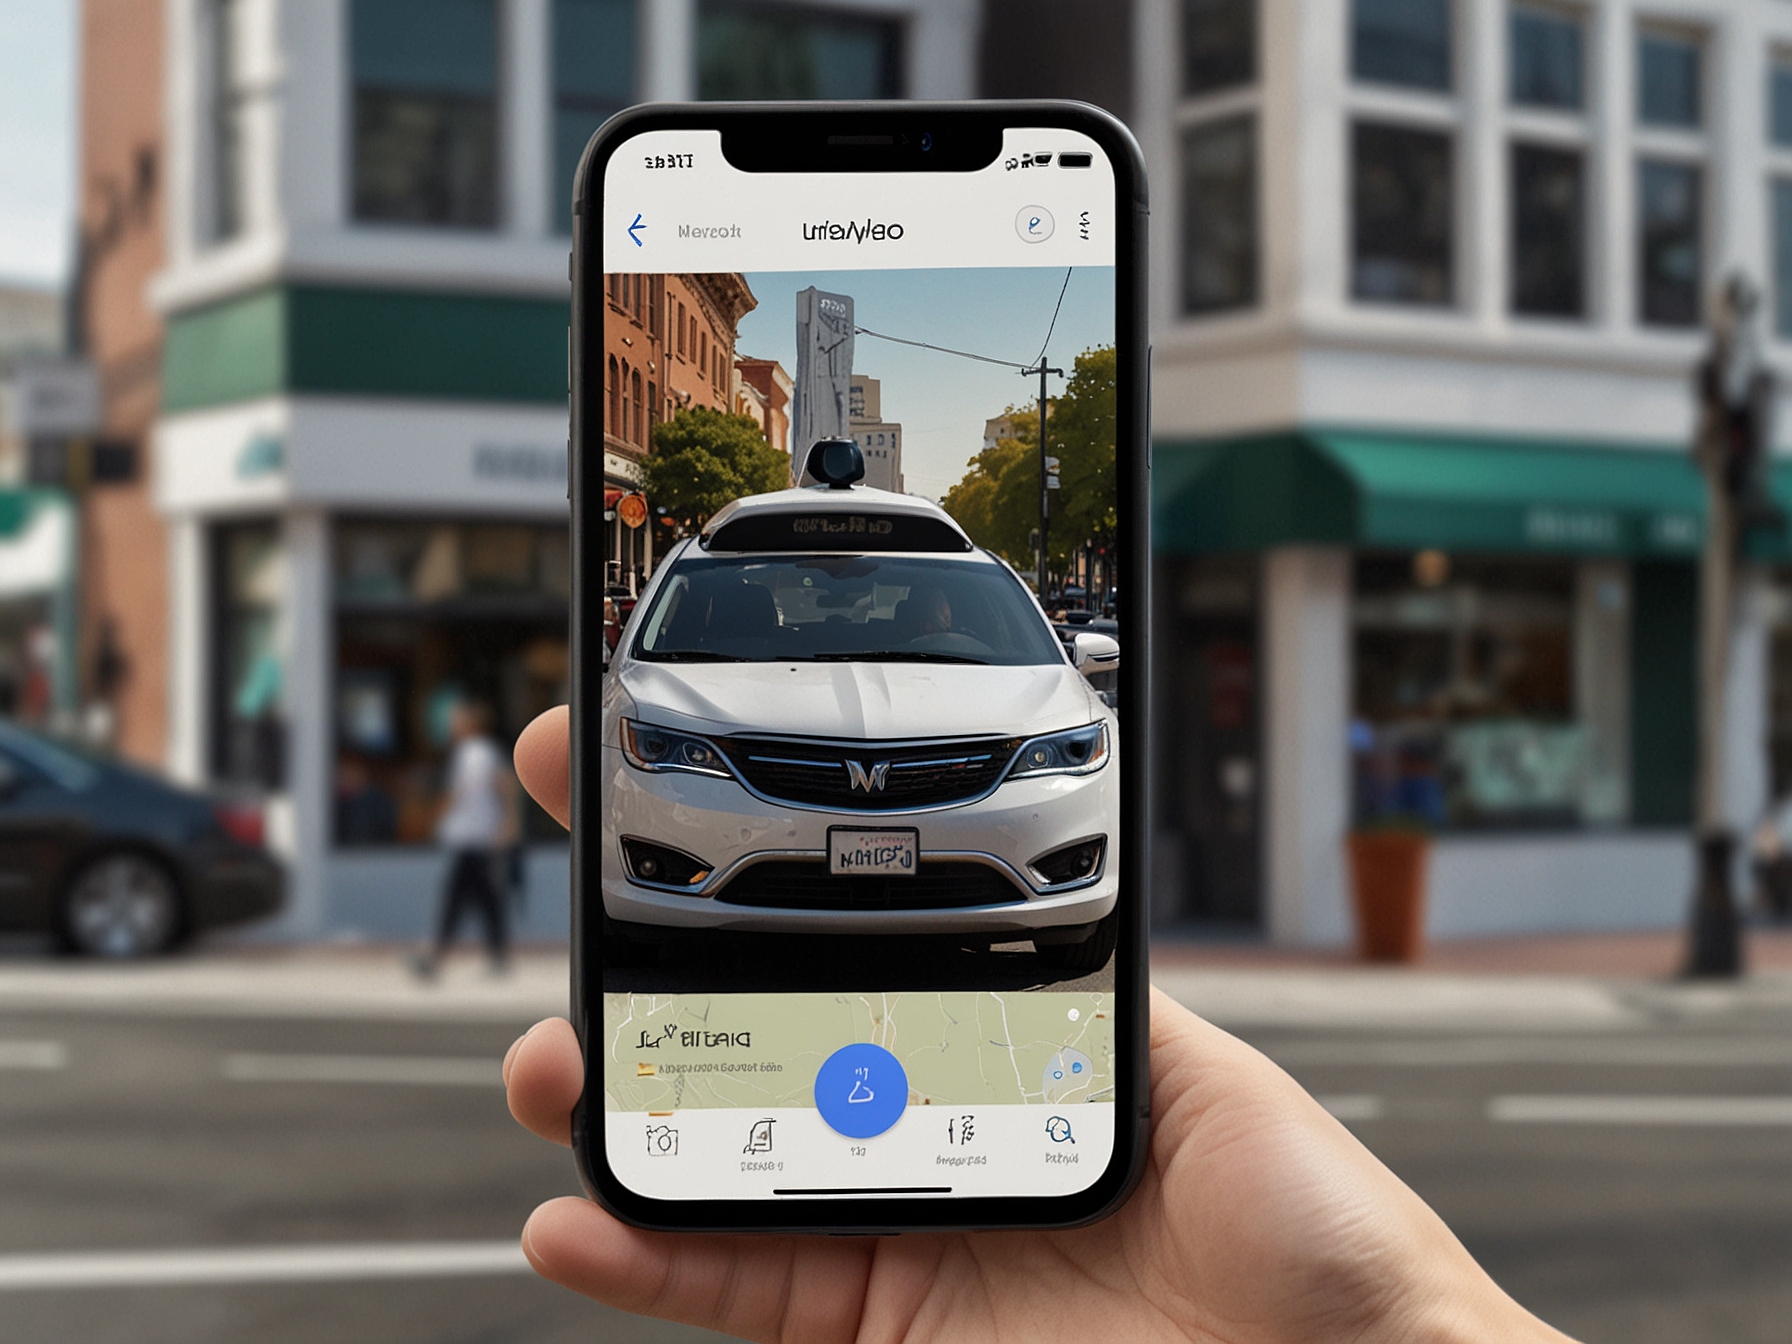 The Waymo app displayed on a smartphone screen, illustrating the simplicity of booking a driverless ride in San Francisco using this cutting-edge technology.